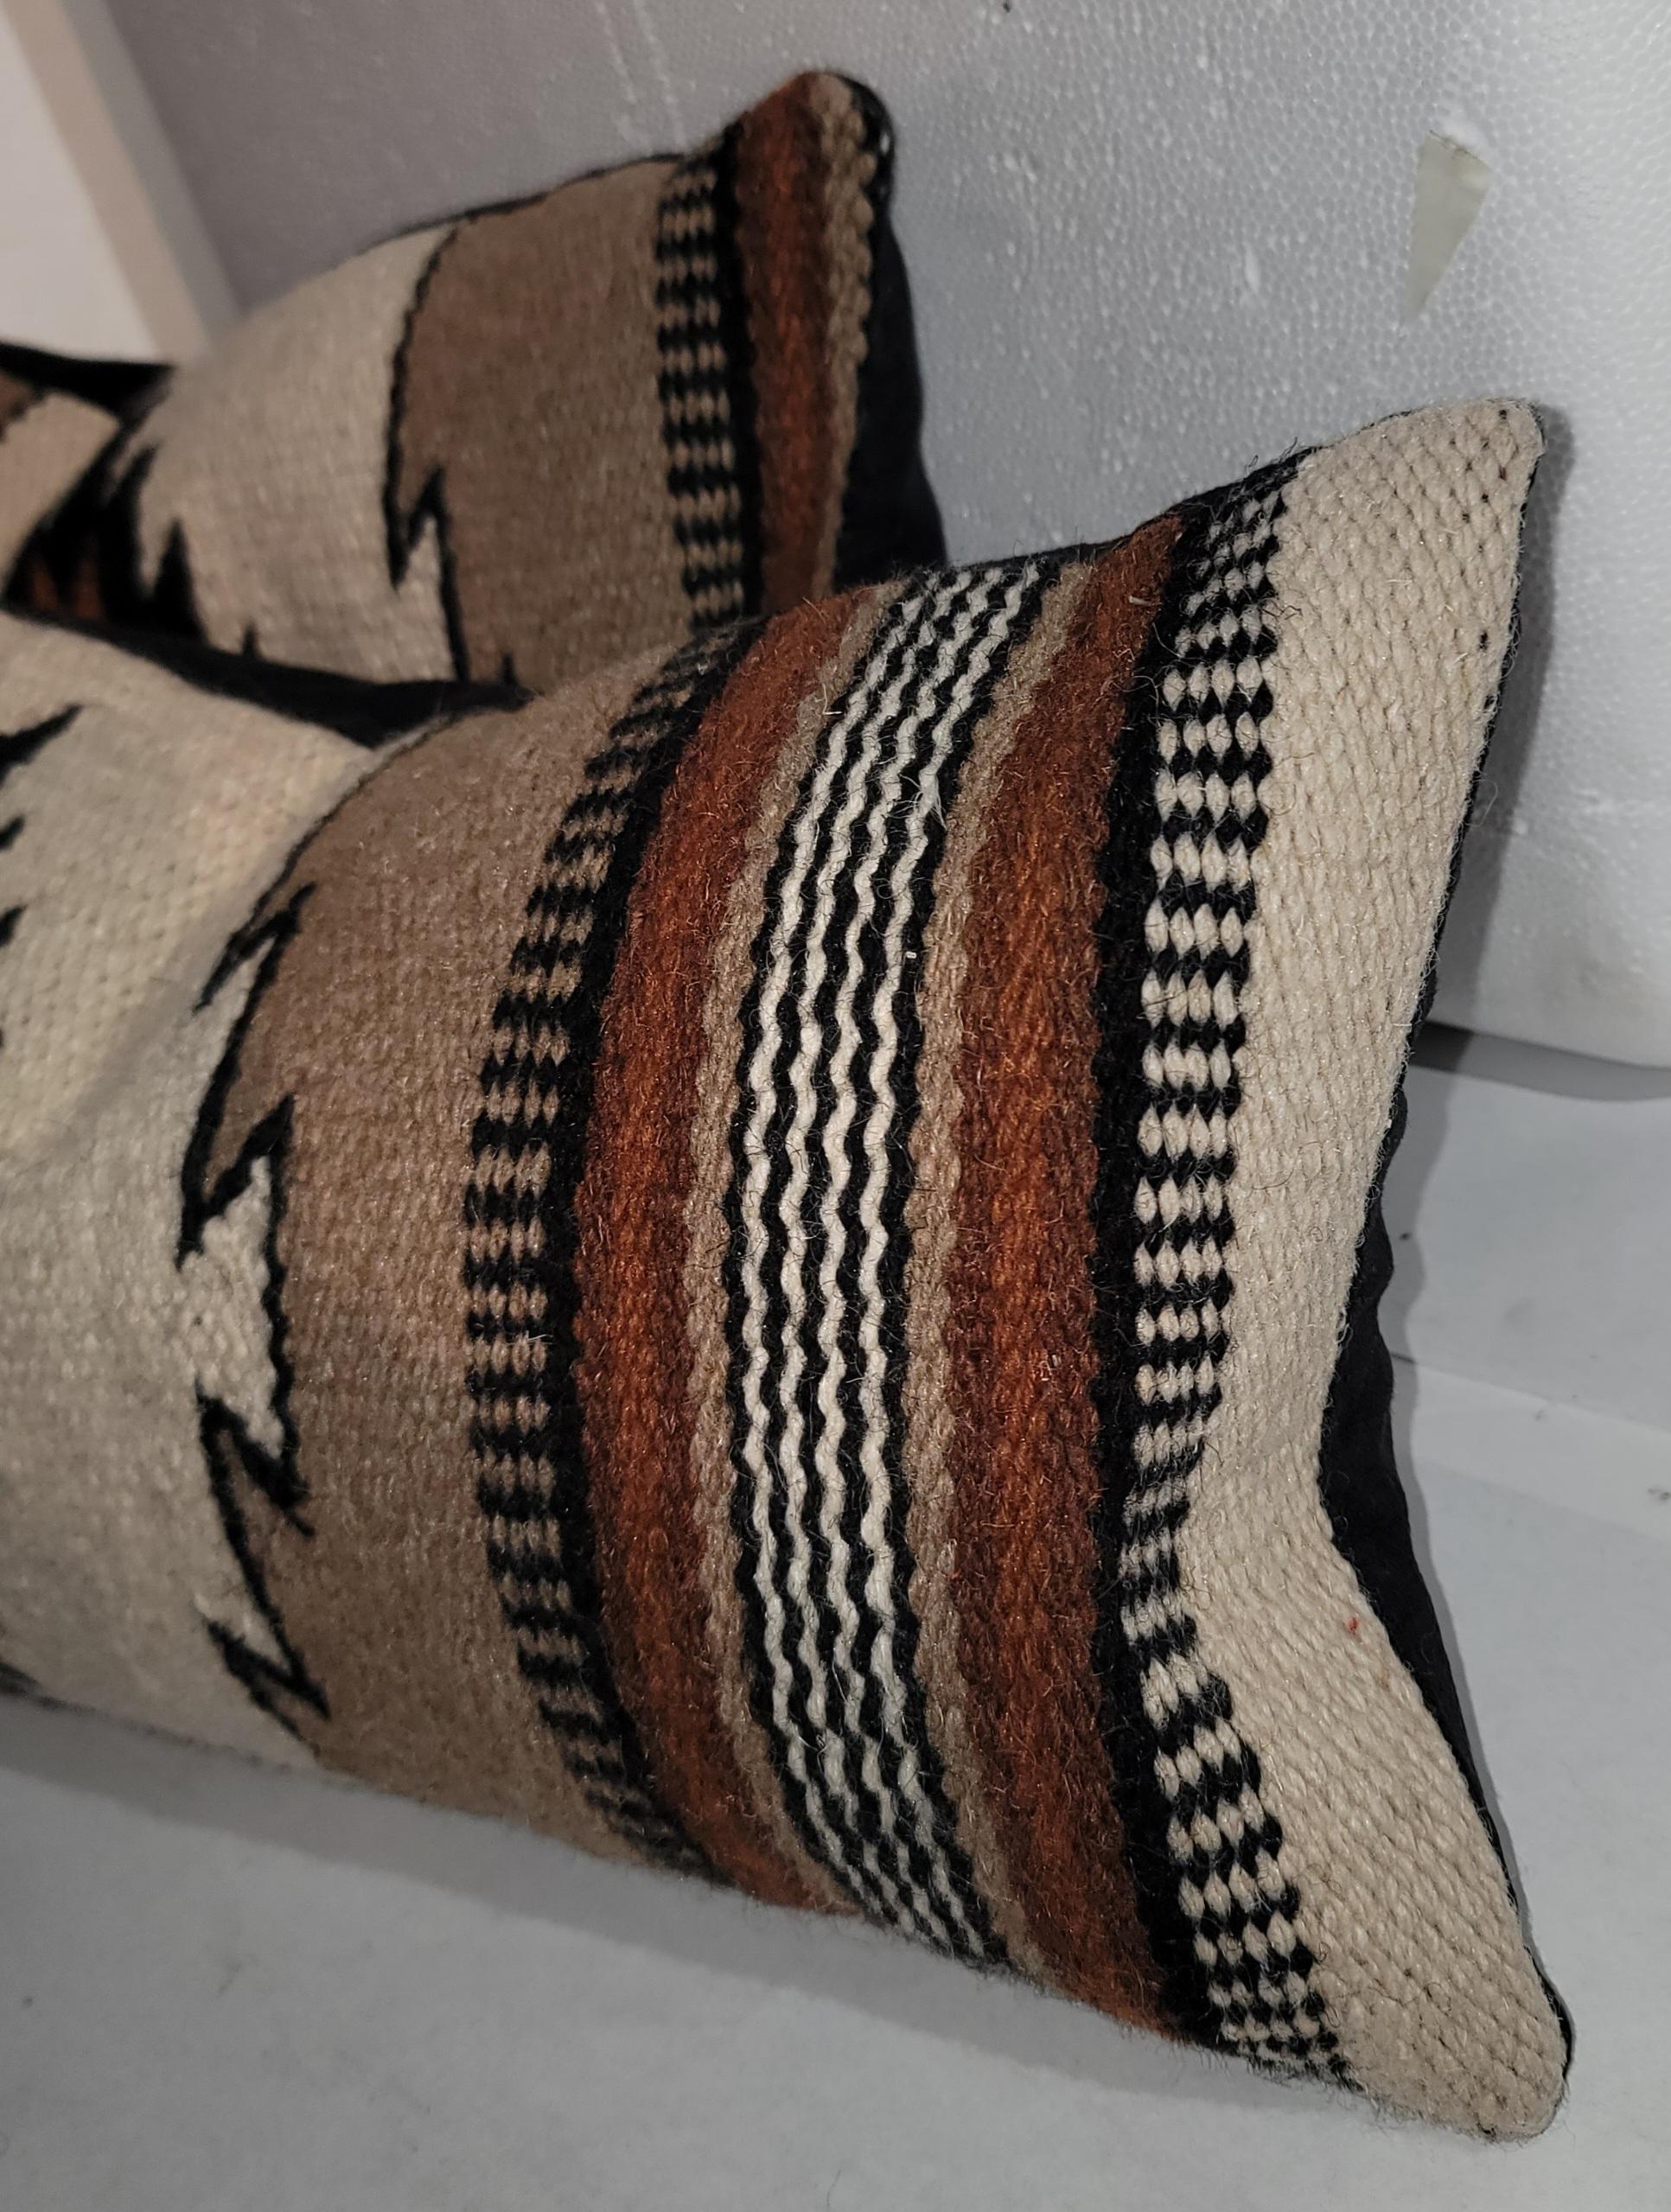 Mexican Indian weaving pillows are in fine condition and all have dark cotton linen backings. The inserts are down and feather fill.